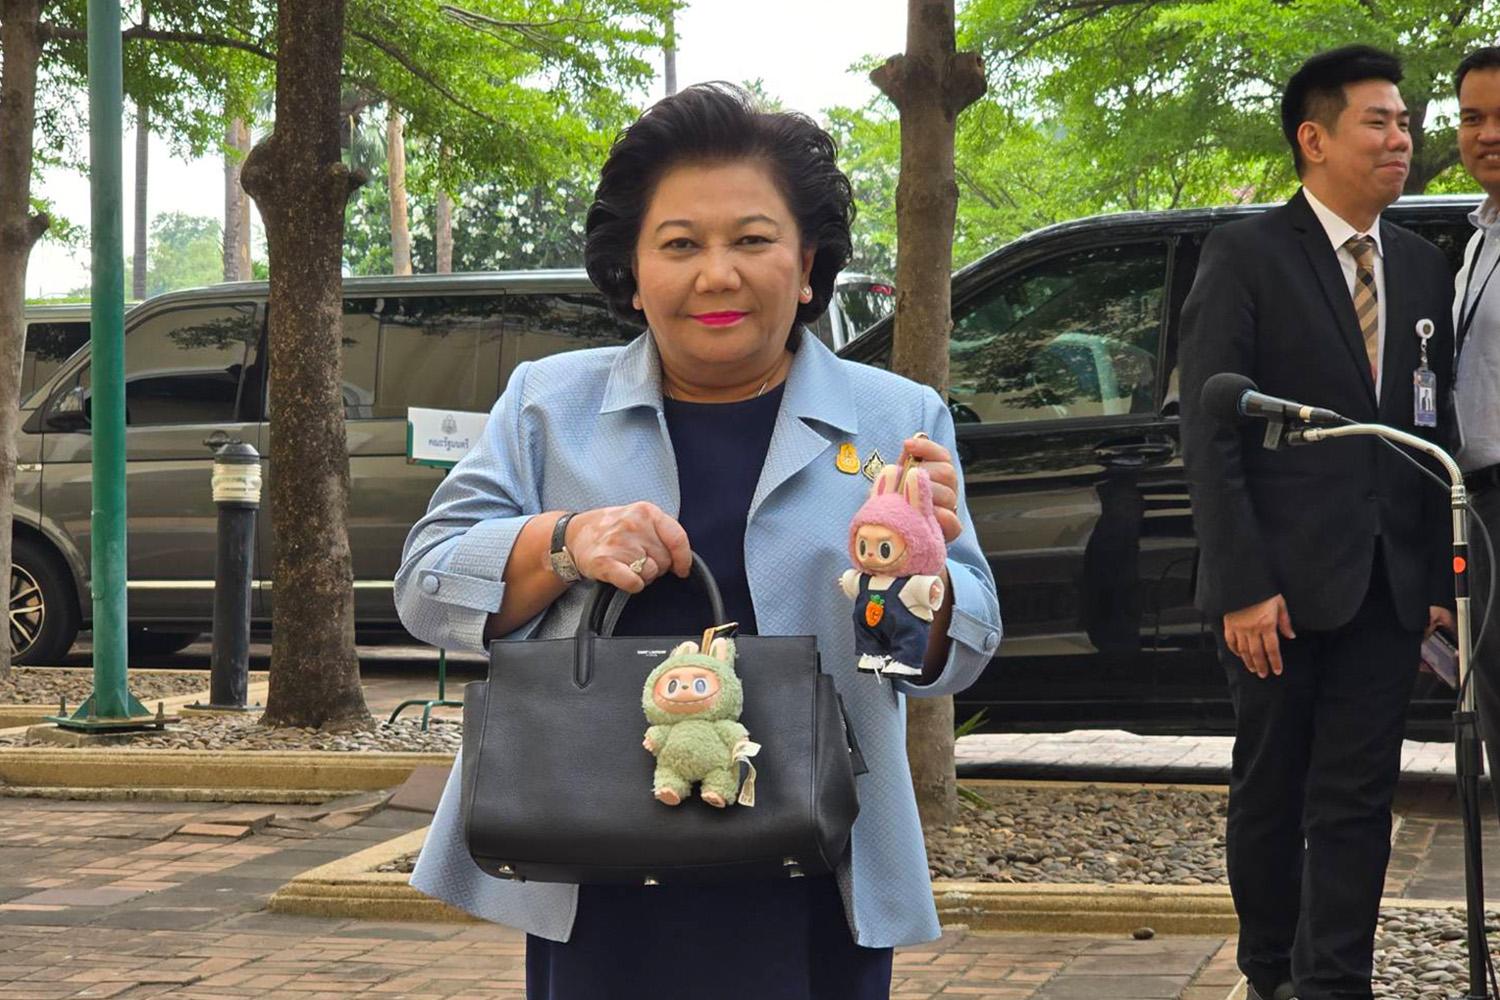 Puangpet-hanging-doll-Labubu-attended-meeting-at-Government-House-SPACEBAR-Hero.jpg